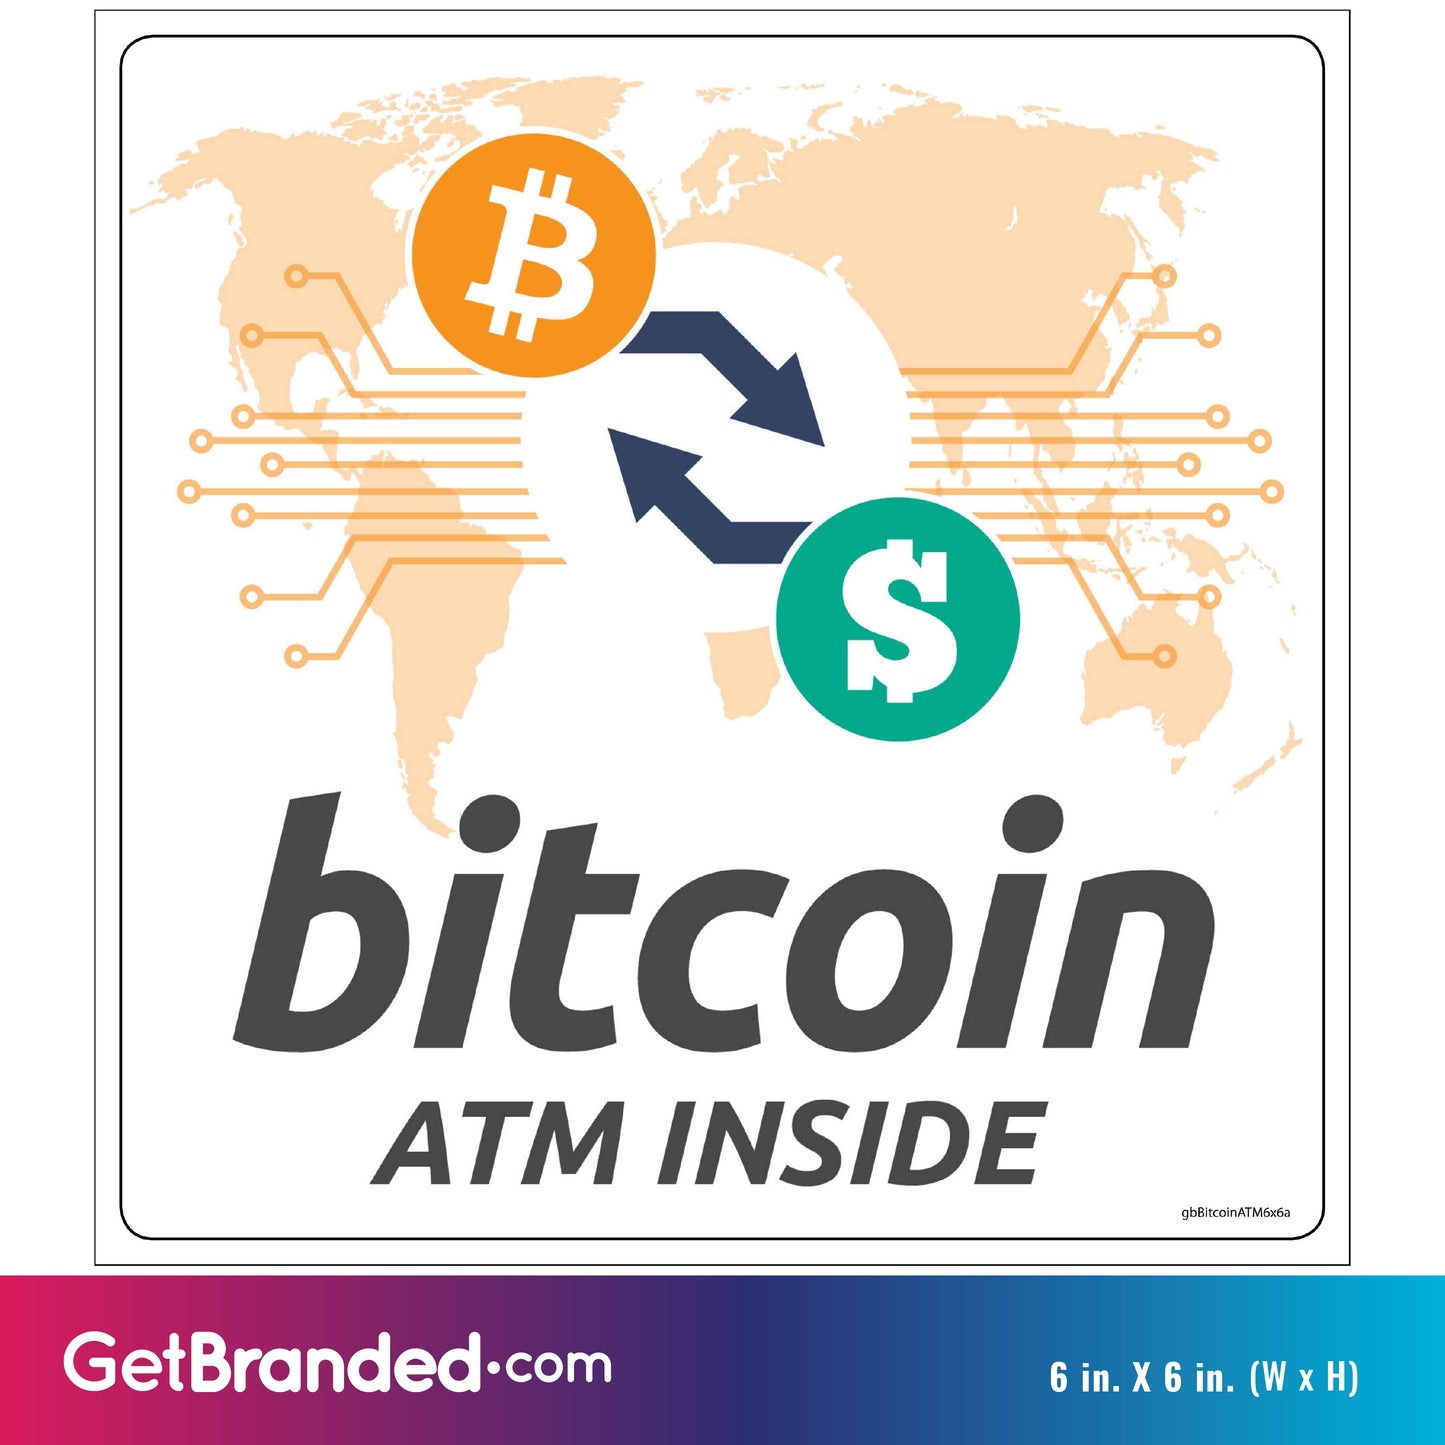 Bitcoin ATM Inside Decal with Globe size guide. 6 inches by 6 inches in size.